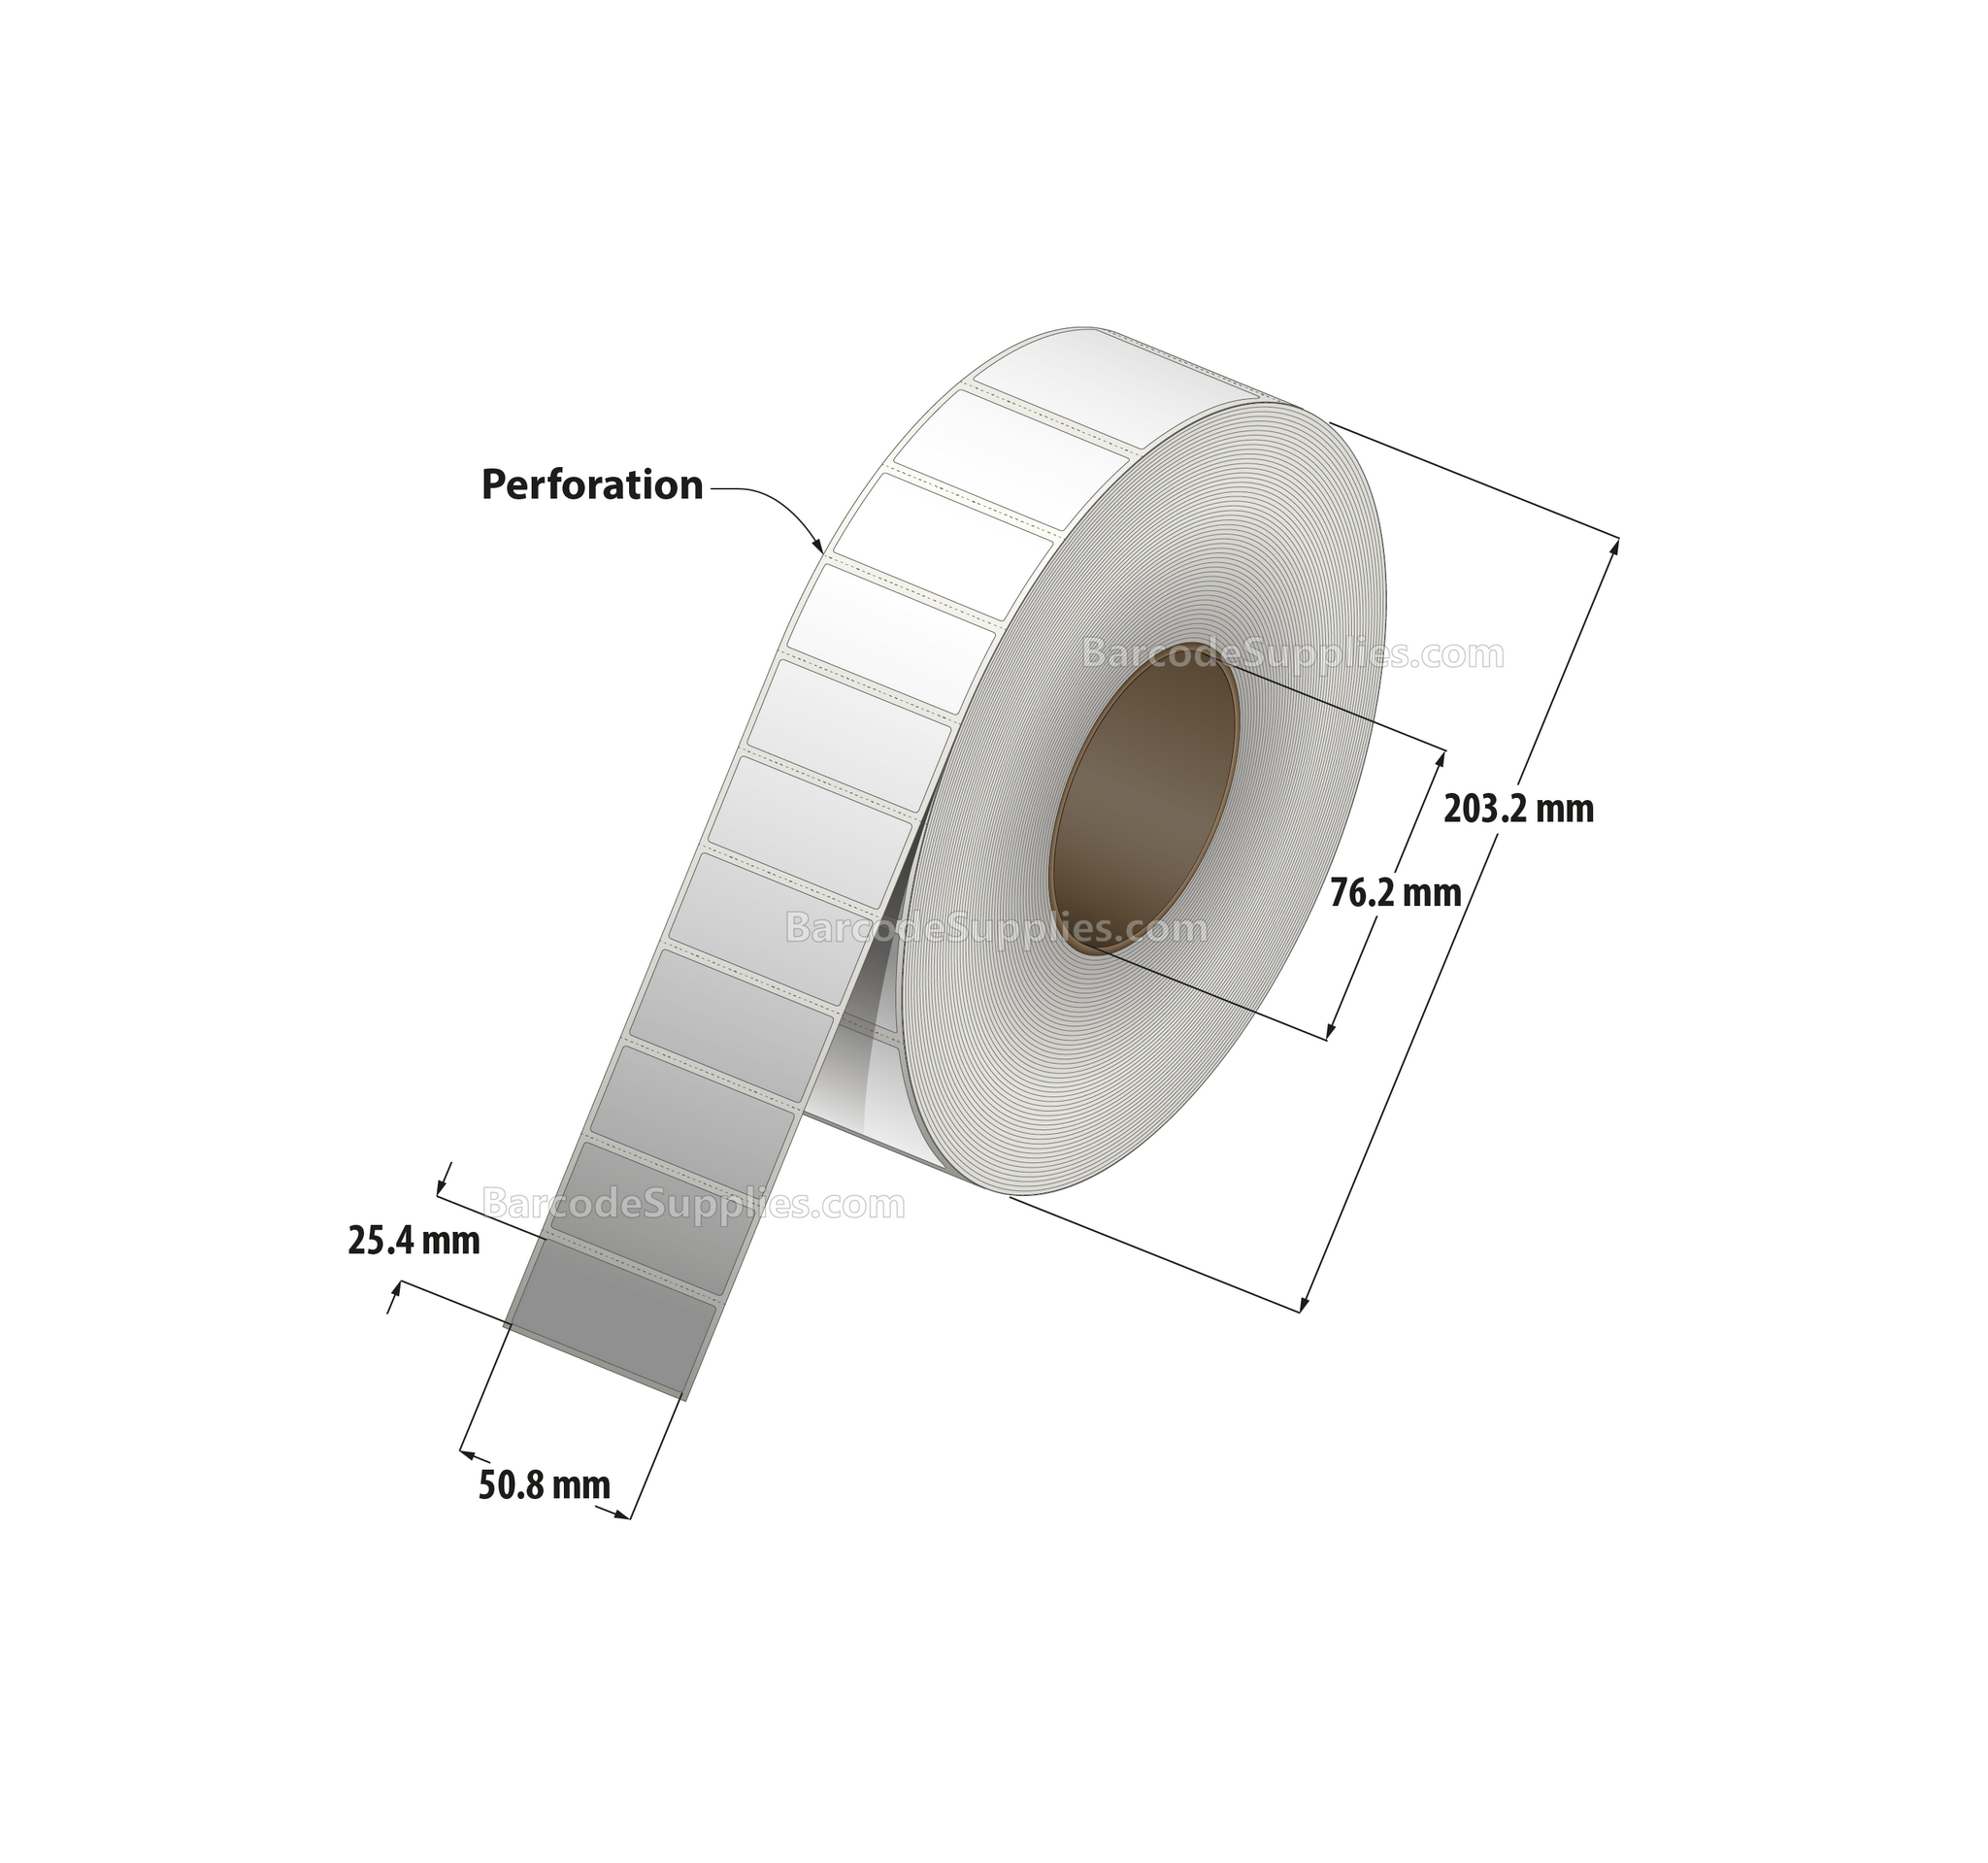 2 x 1 Direct Thermal White Labels With Acrylic Adhesive - Perforated - 5500 Labels Per Roll - Carton Of 8 Rolls - 44000 Labels Total - MPN: RDS-2-1-5500-3 - BarcodeSource, Inc.